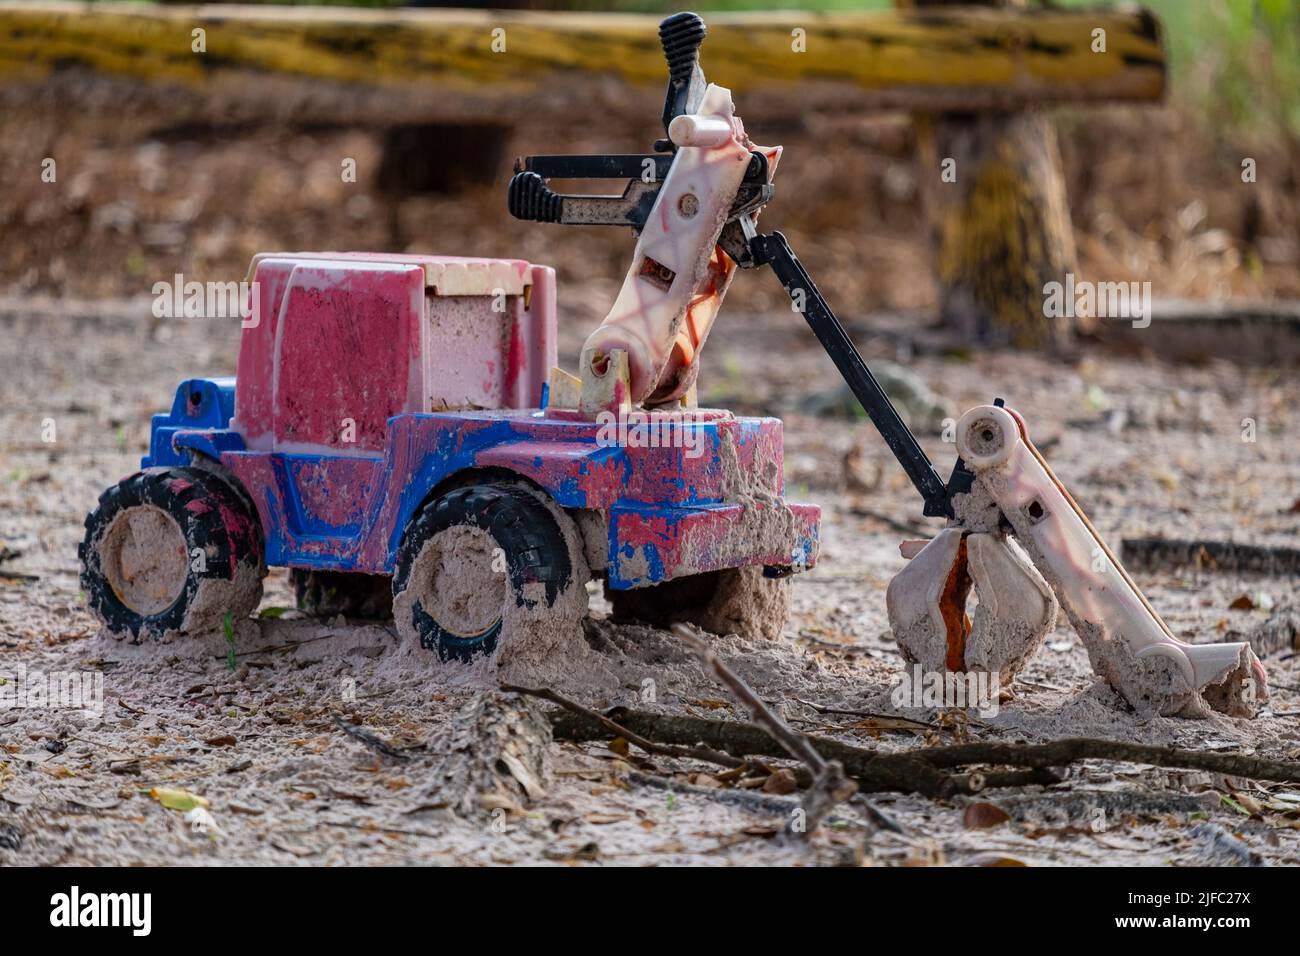 plastic toy car damaged and abandoned in sand. Stock Photo